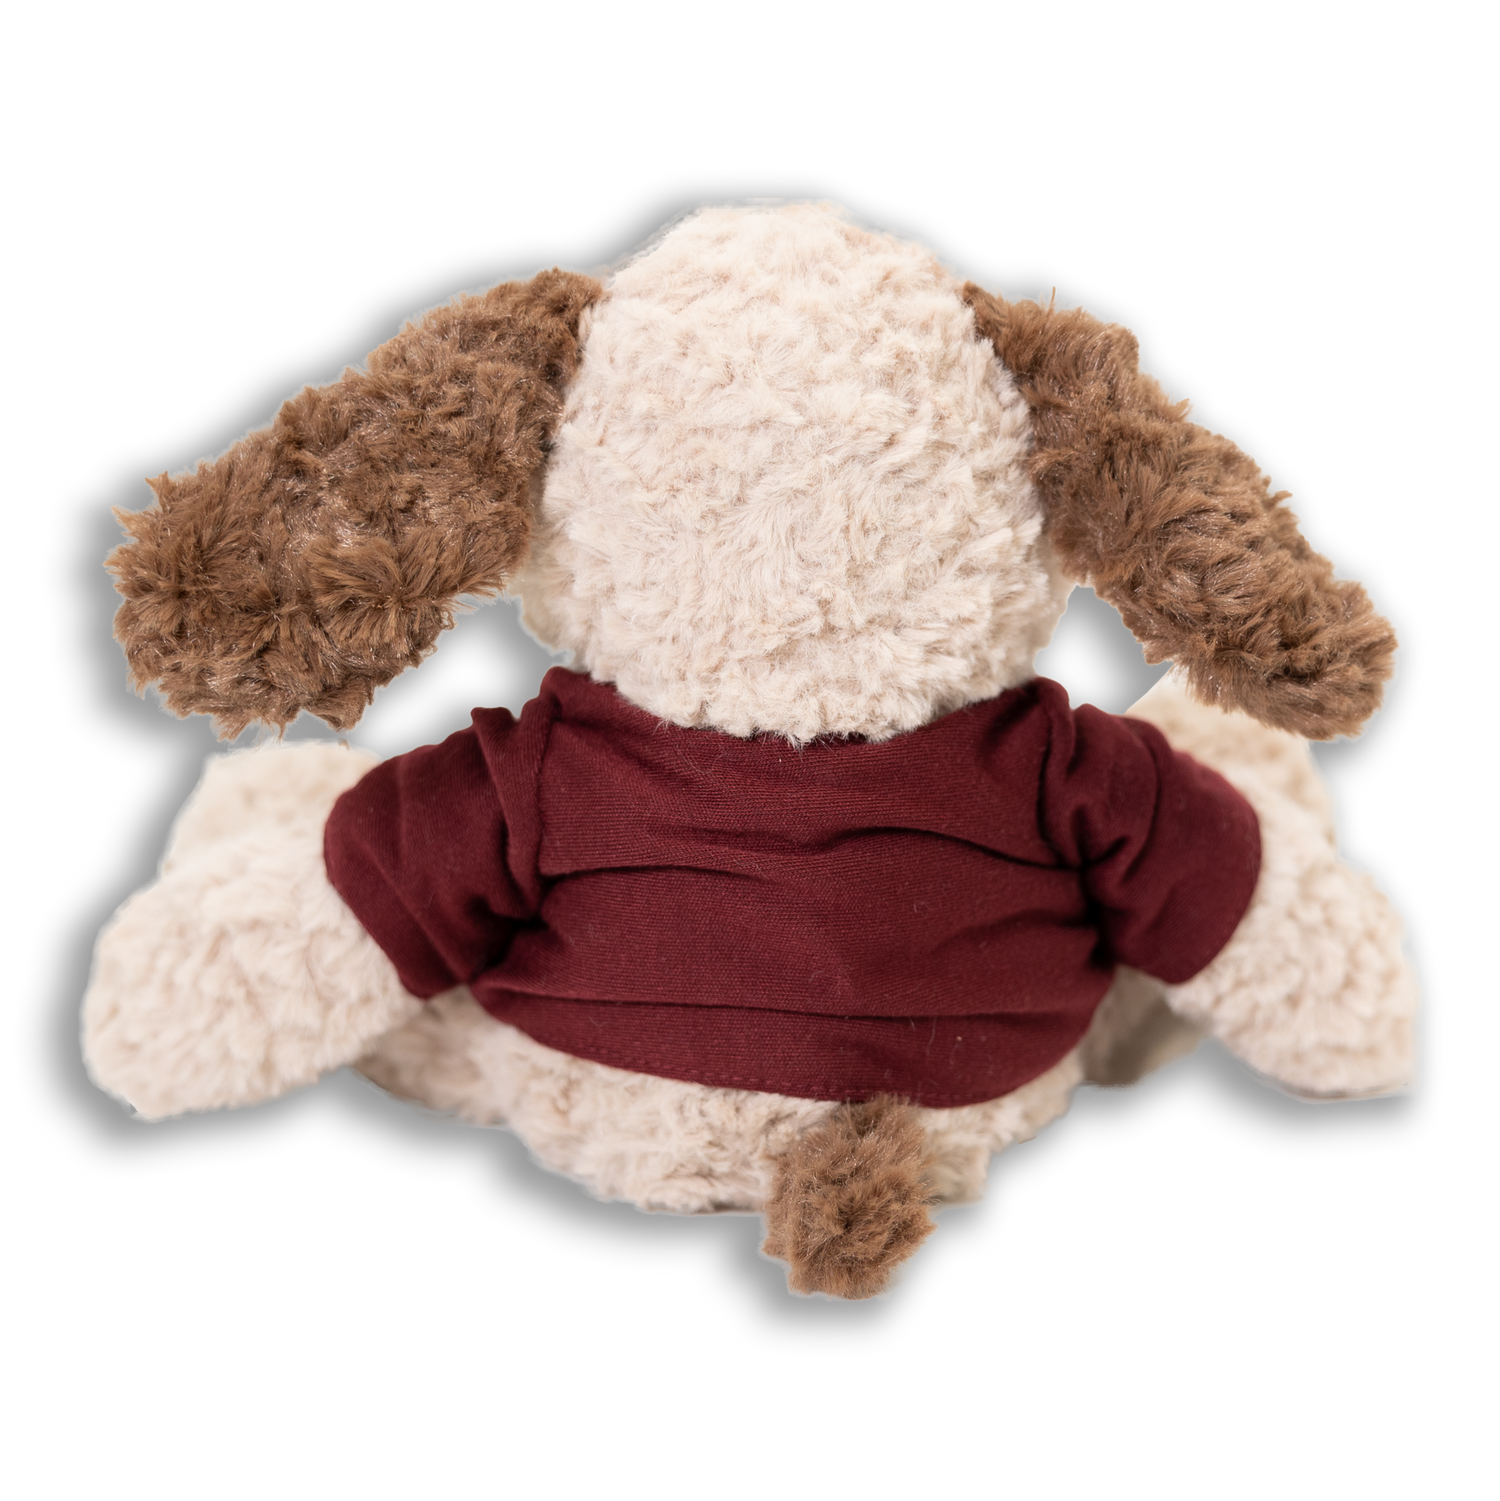 Texas A&M Patches The Dog Stuffed Animal